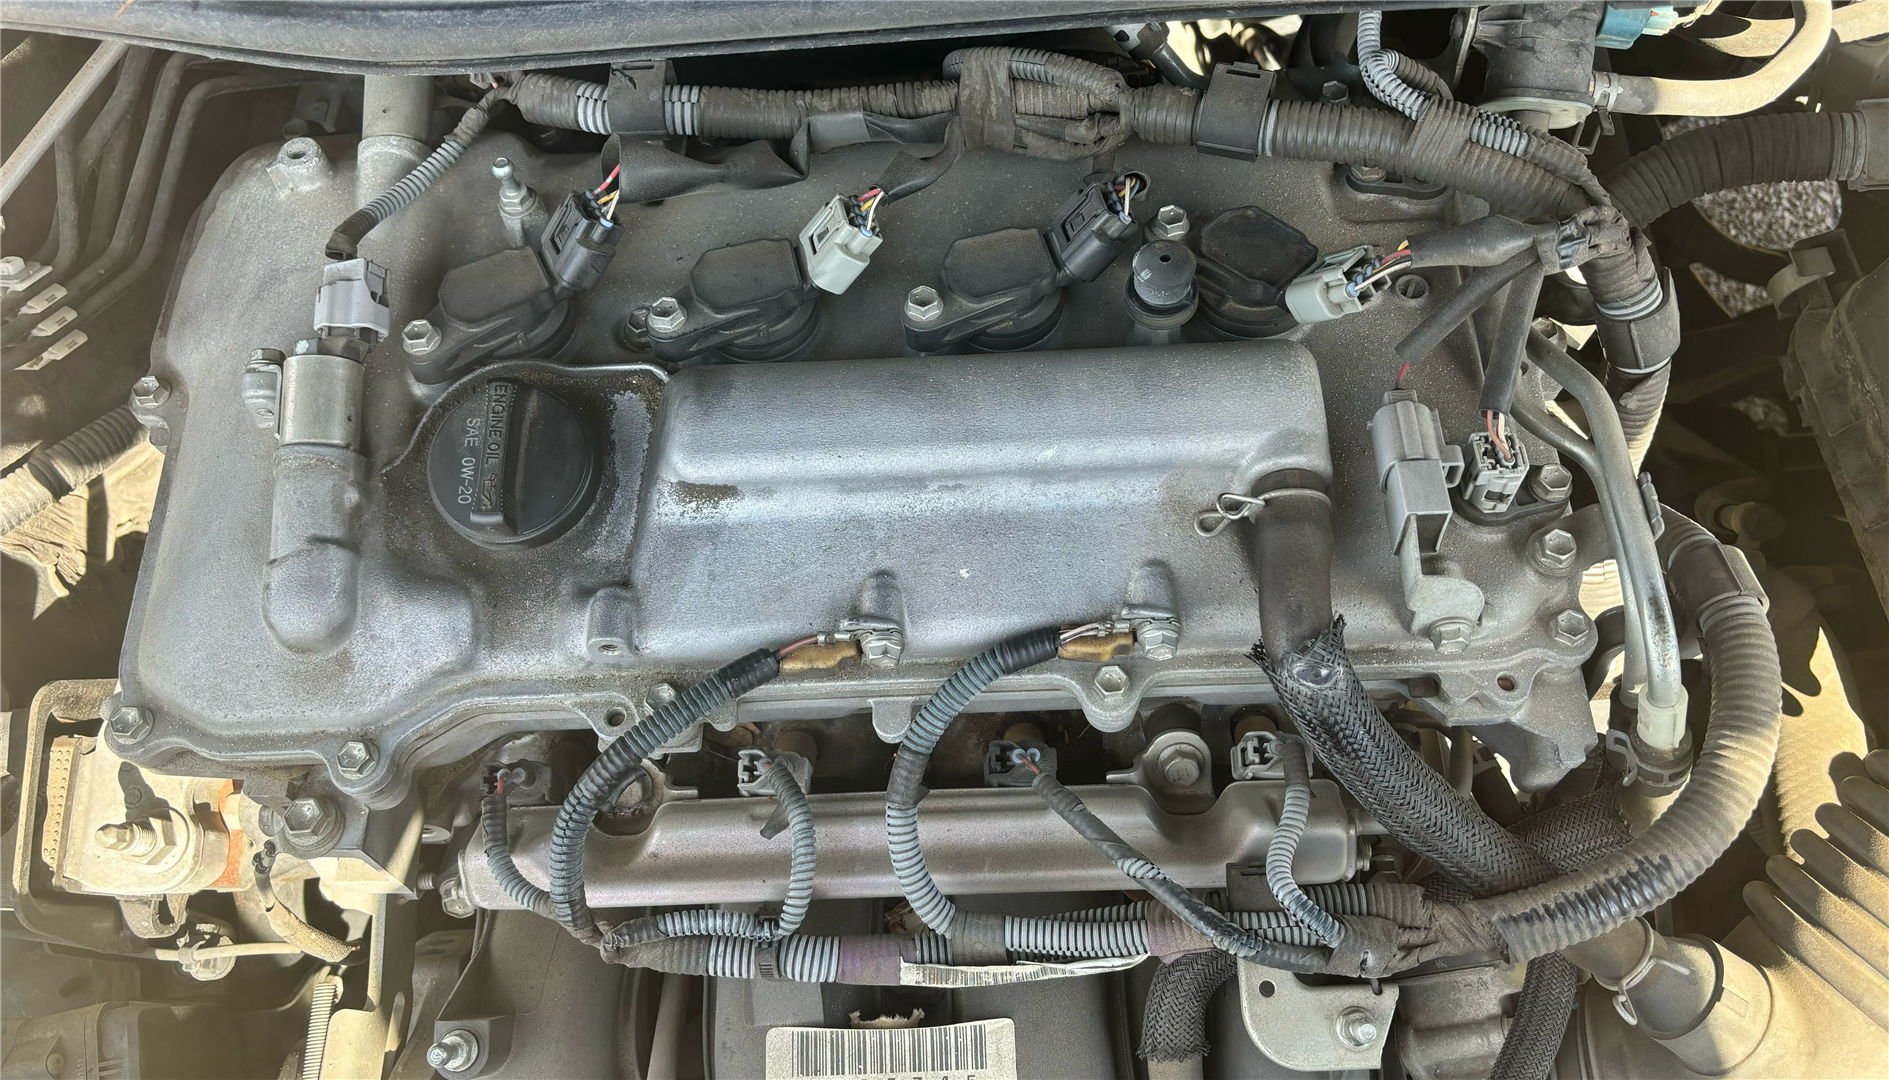 How do I know if I need to replace my vehicle's valve cover?